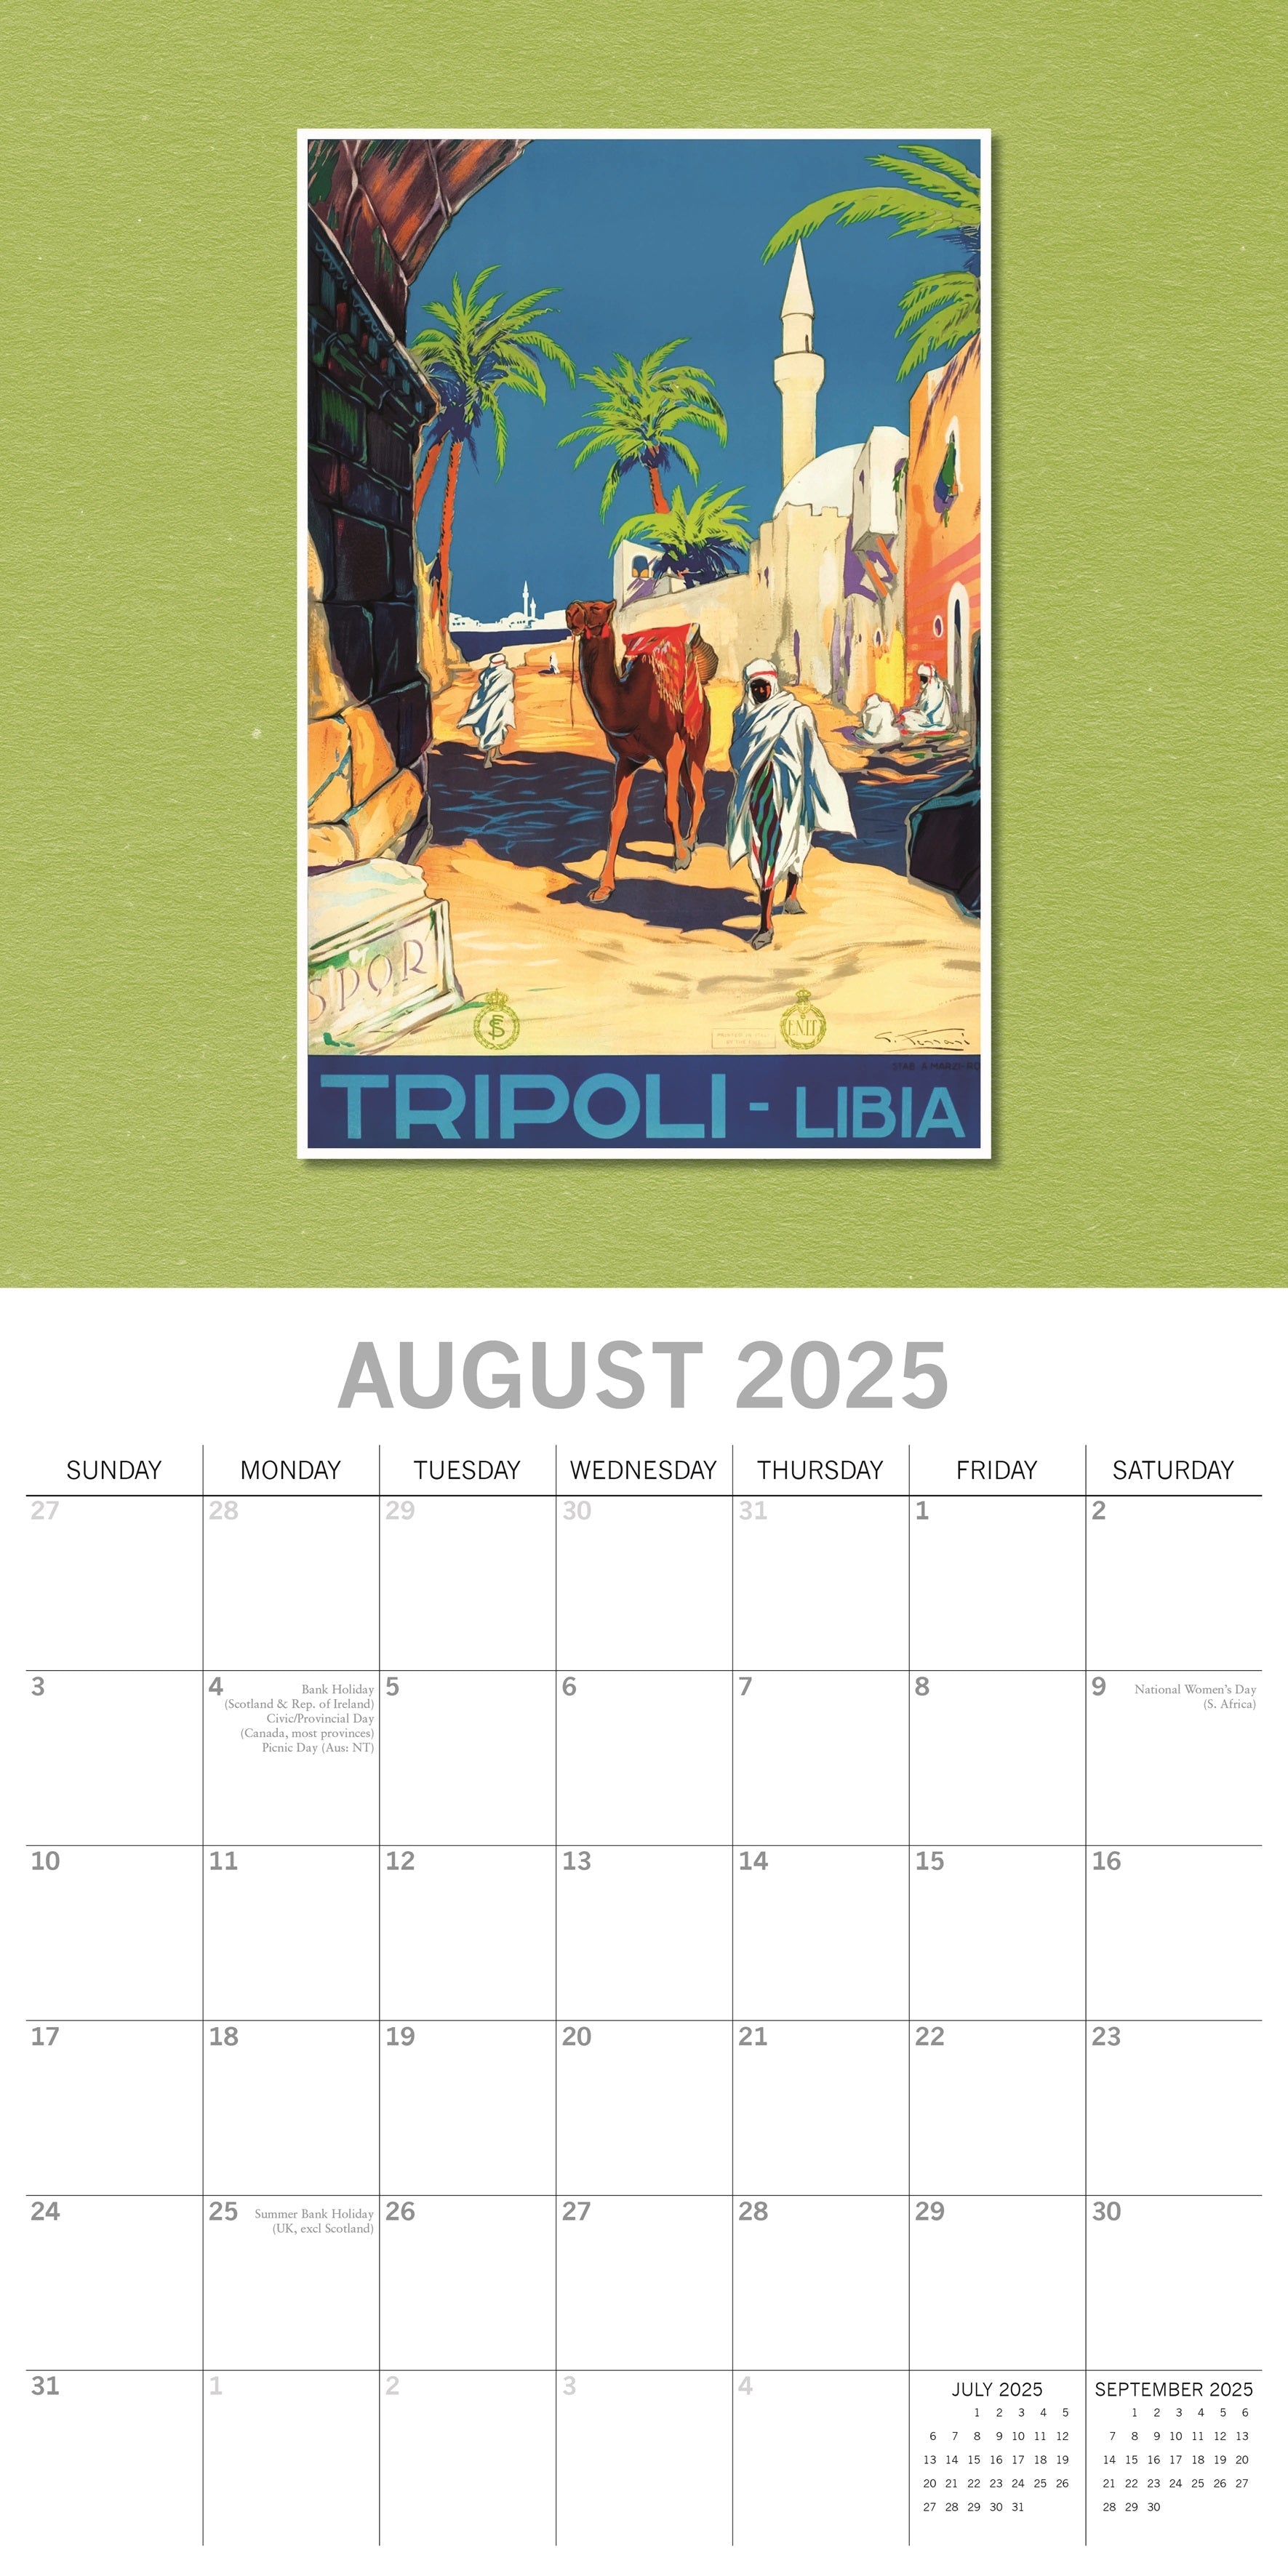 2025 Vintage Travel Posters - Square Wall Calendar